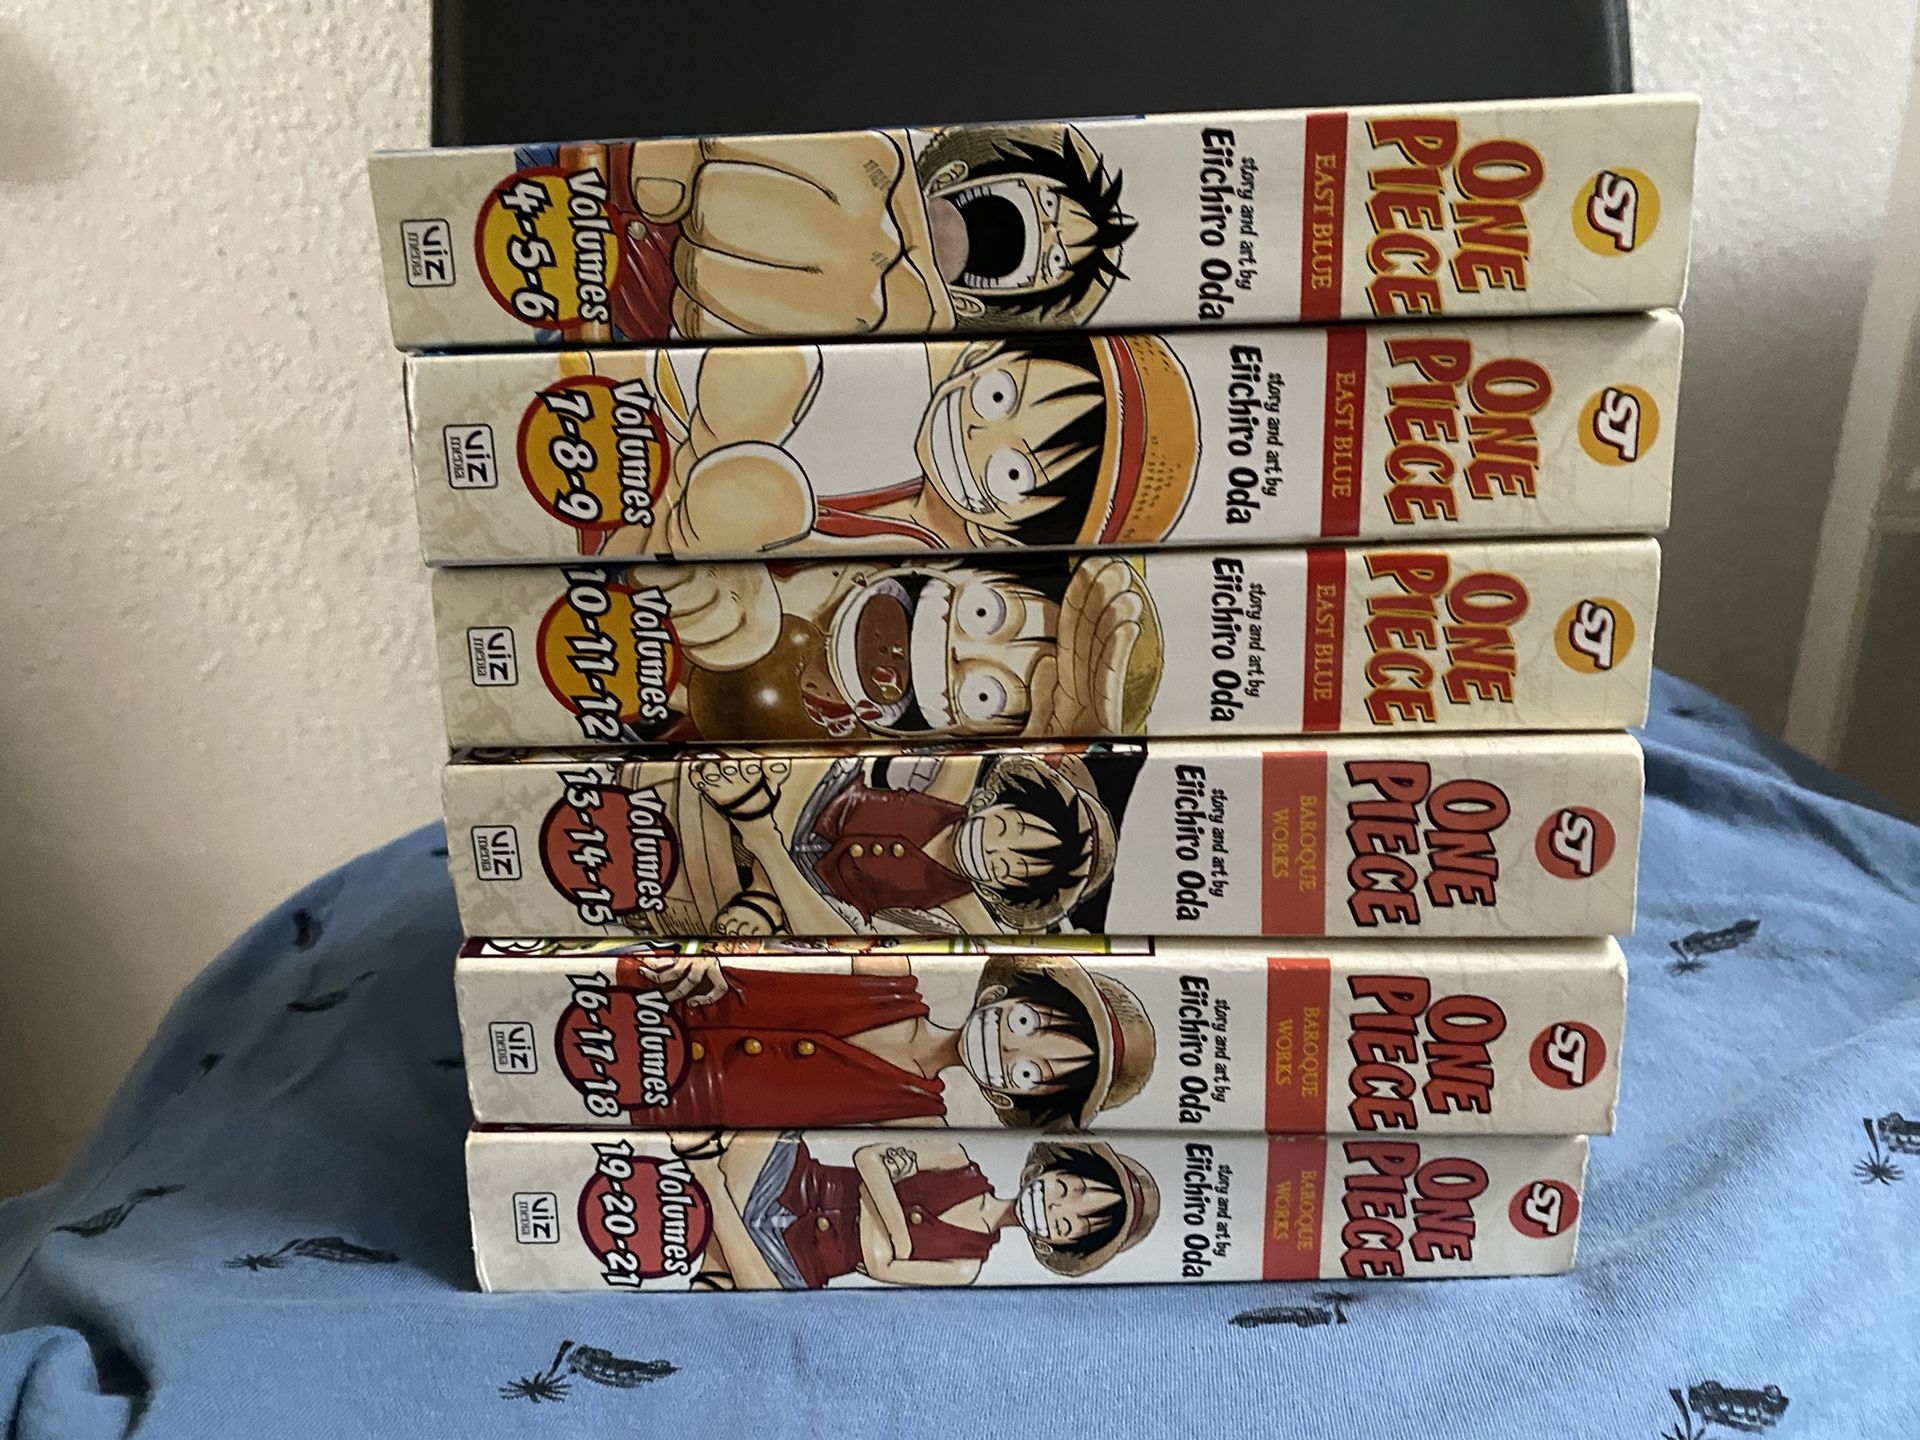 One Piece Manga 4-6,7-9,10-12,13-15,16-18,19-21 for Sale in Biscayne Park,  FL - OfferUp